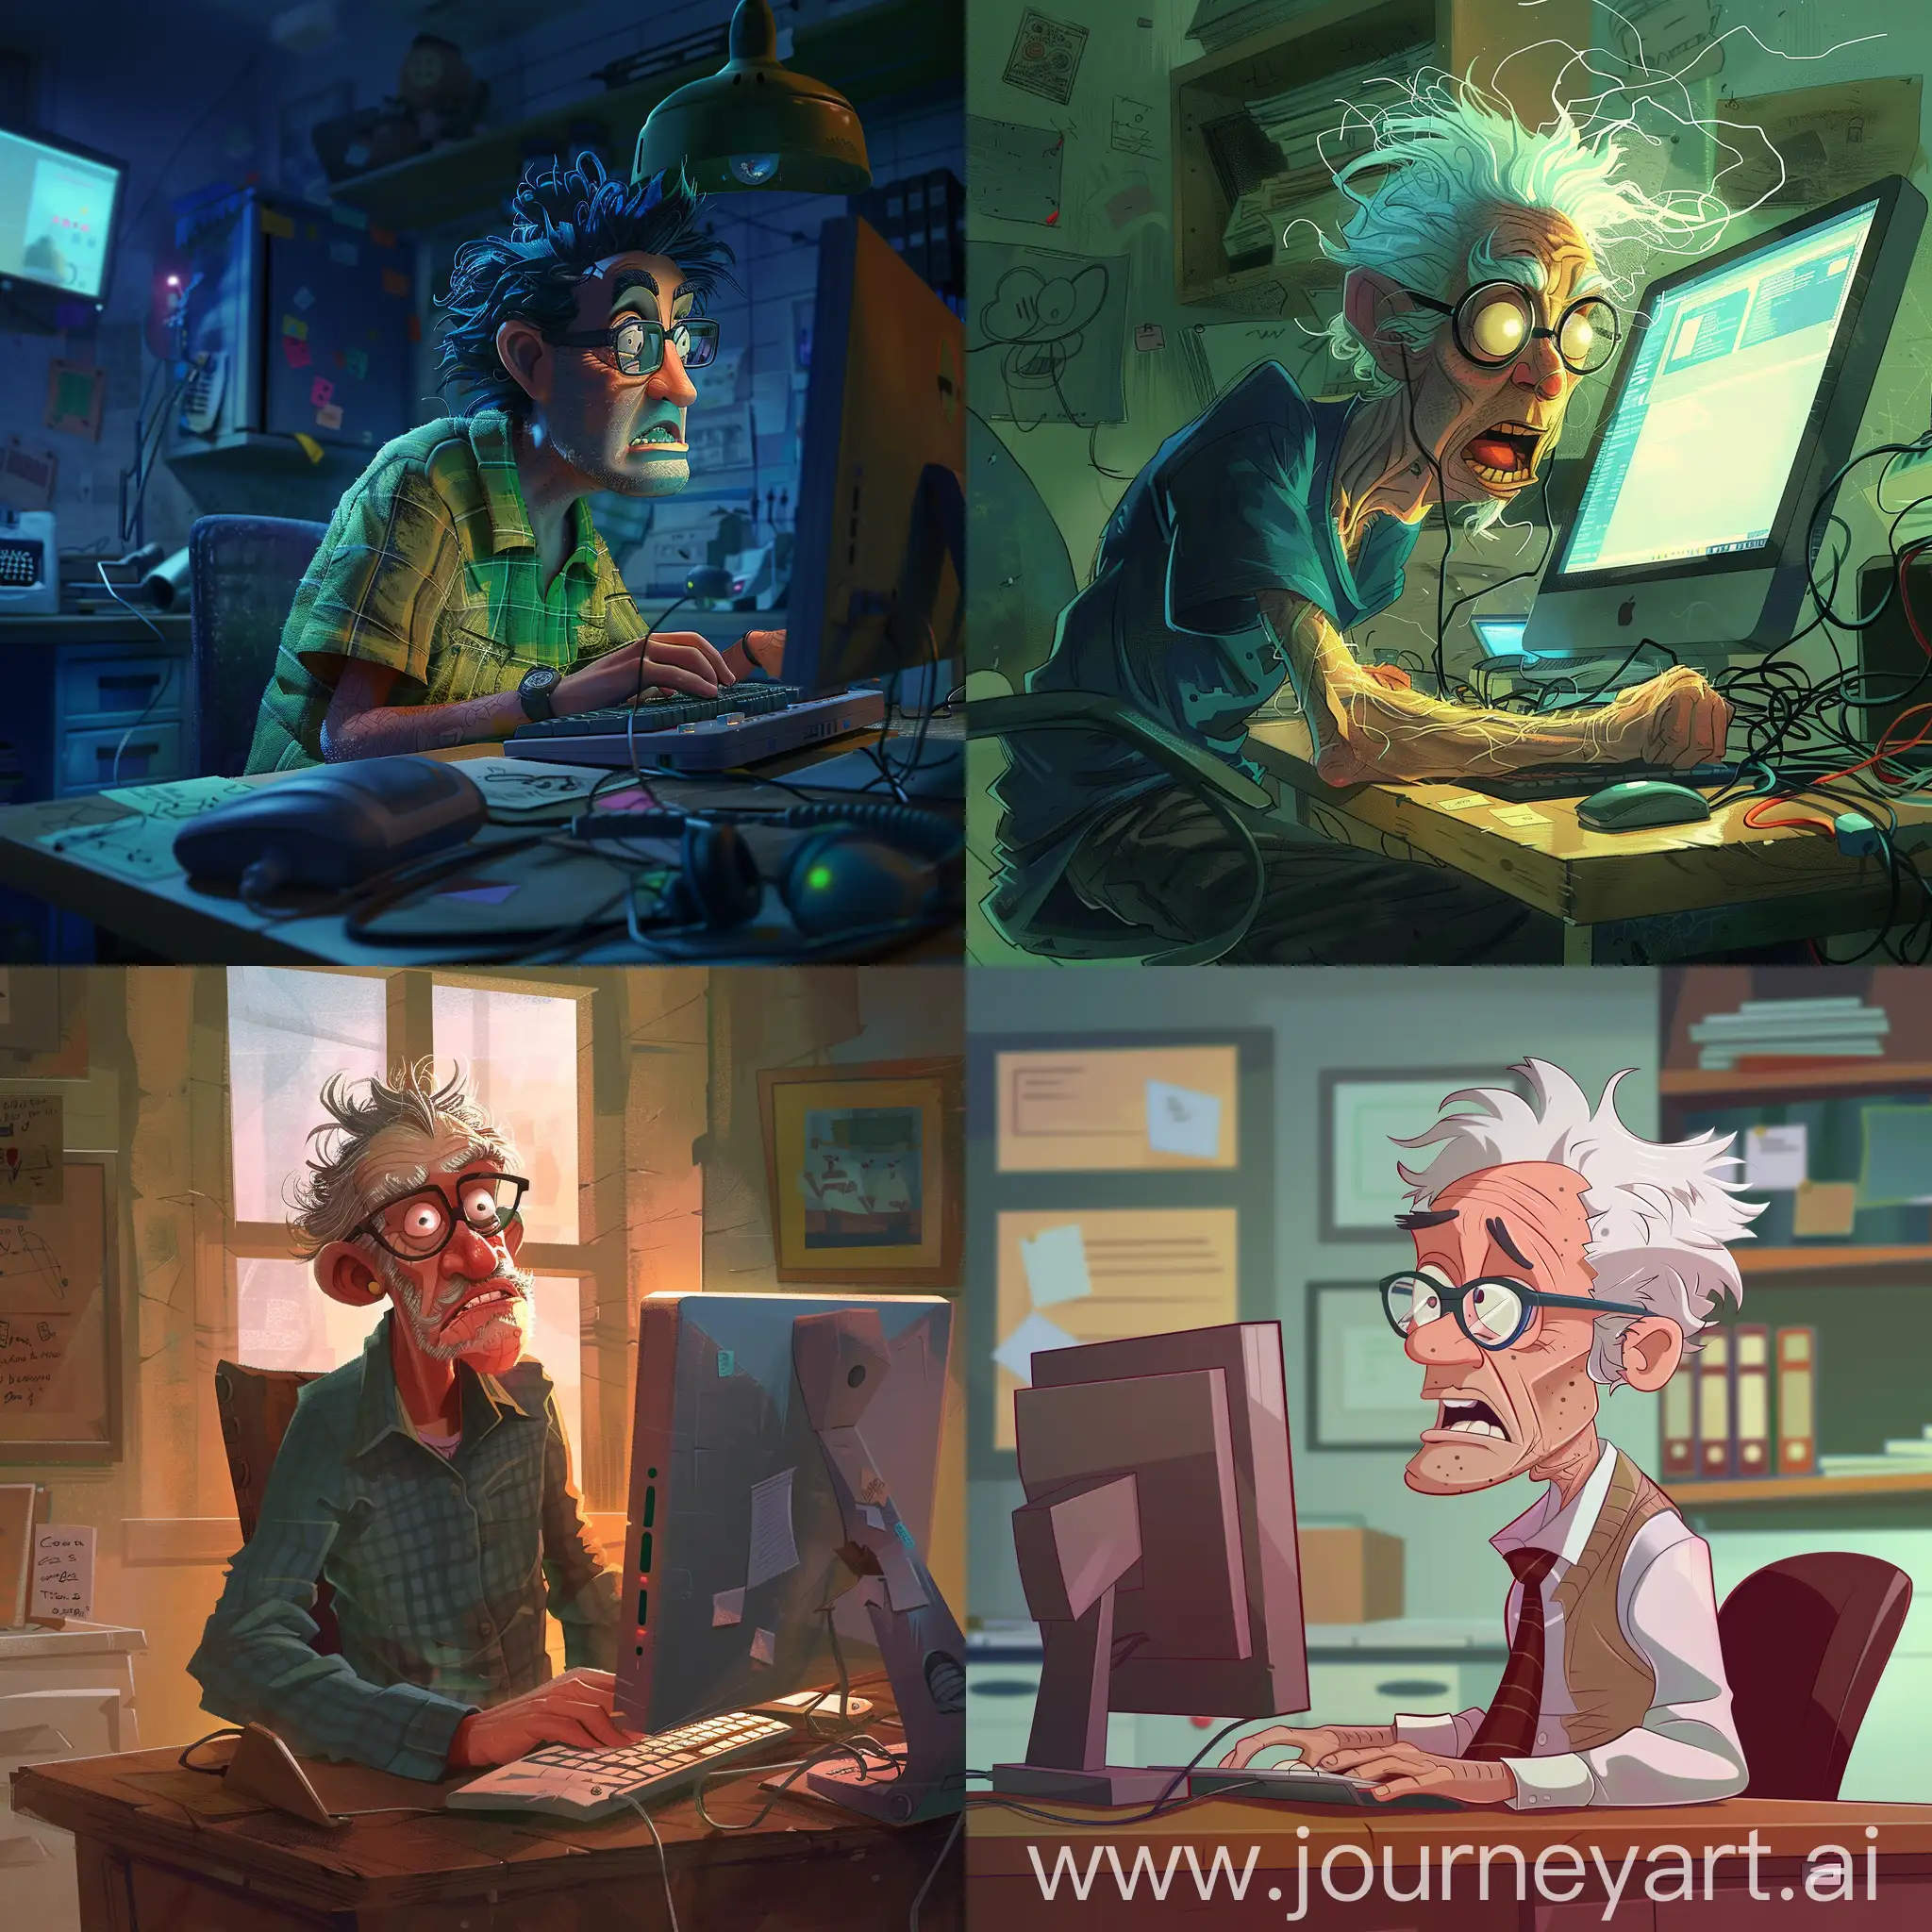 A crazy programmer is sitting at a computer. pixar style